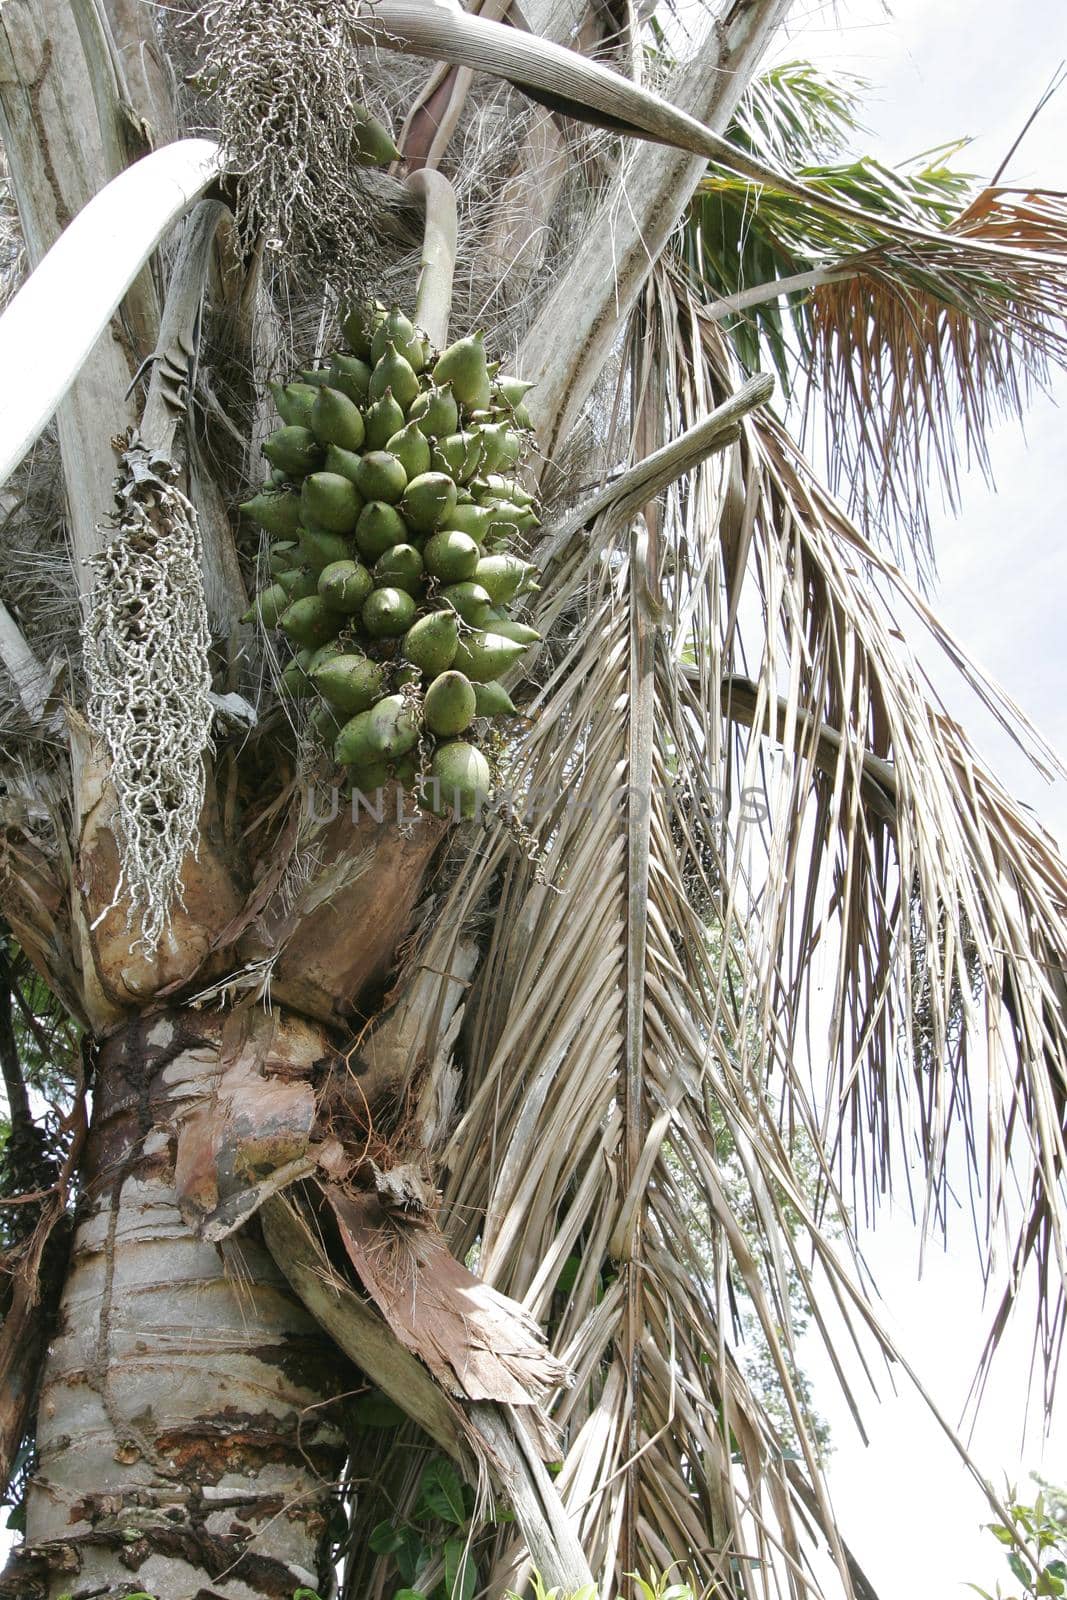 conde, bahia / brazil - march 24, 2011: Piassava palm tree. The fruit is used to extract vegetable oil.